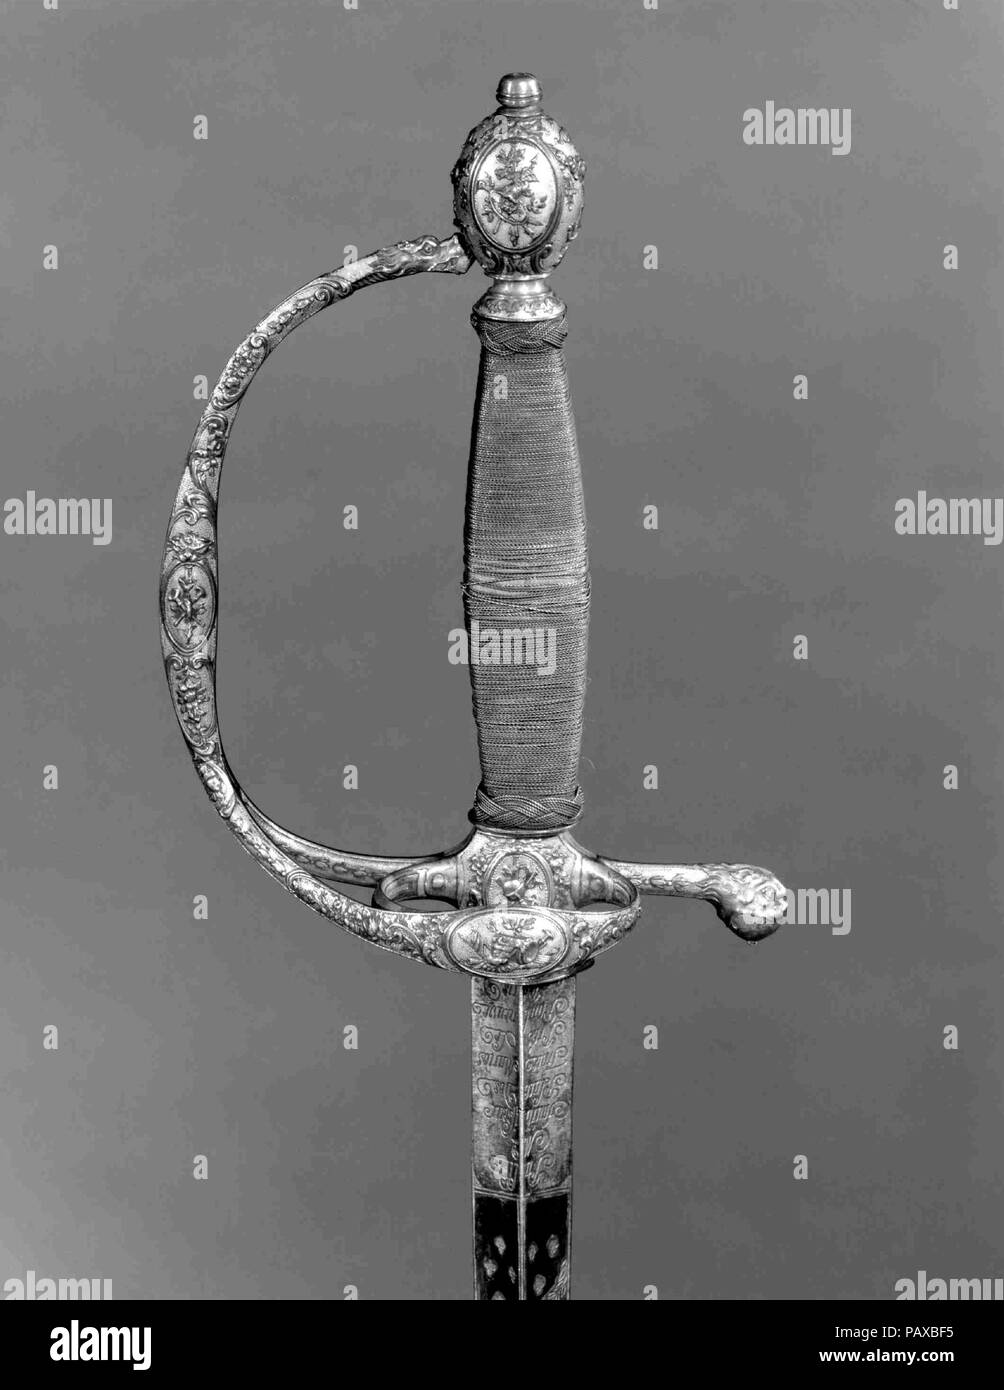 Smallsword with Scabbard. Culture: French, Paris. Dimensions: L. with scabbard 38 3/4 in. (98.4 cm); L. without scabbard 37 13/16 in. (96 cm); L. of blade 31 3/8 in. (79.7 cm); W. 4 5/16 in. (11 cm); D. 1 3/4 in. (4.5 cm); Wt. 12 oz. (340 g); Wt. of scabbard 2 oz. (56.7 g). Date: ca. 1785. Museum: Metropolitan Museum of Art, New York, USA. Stock Photo